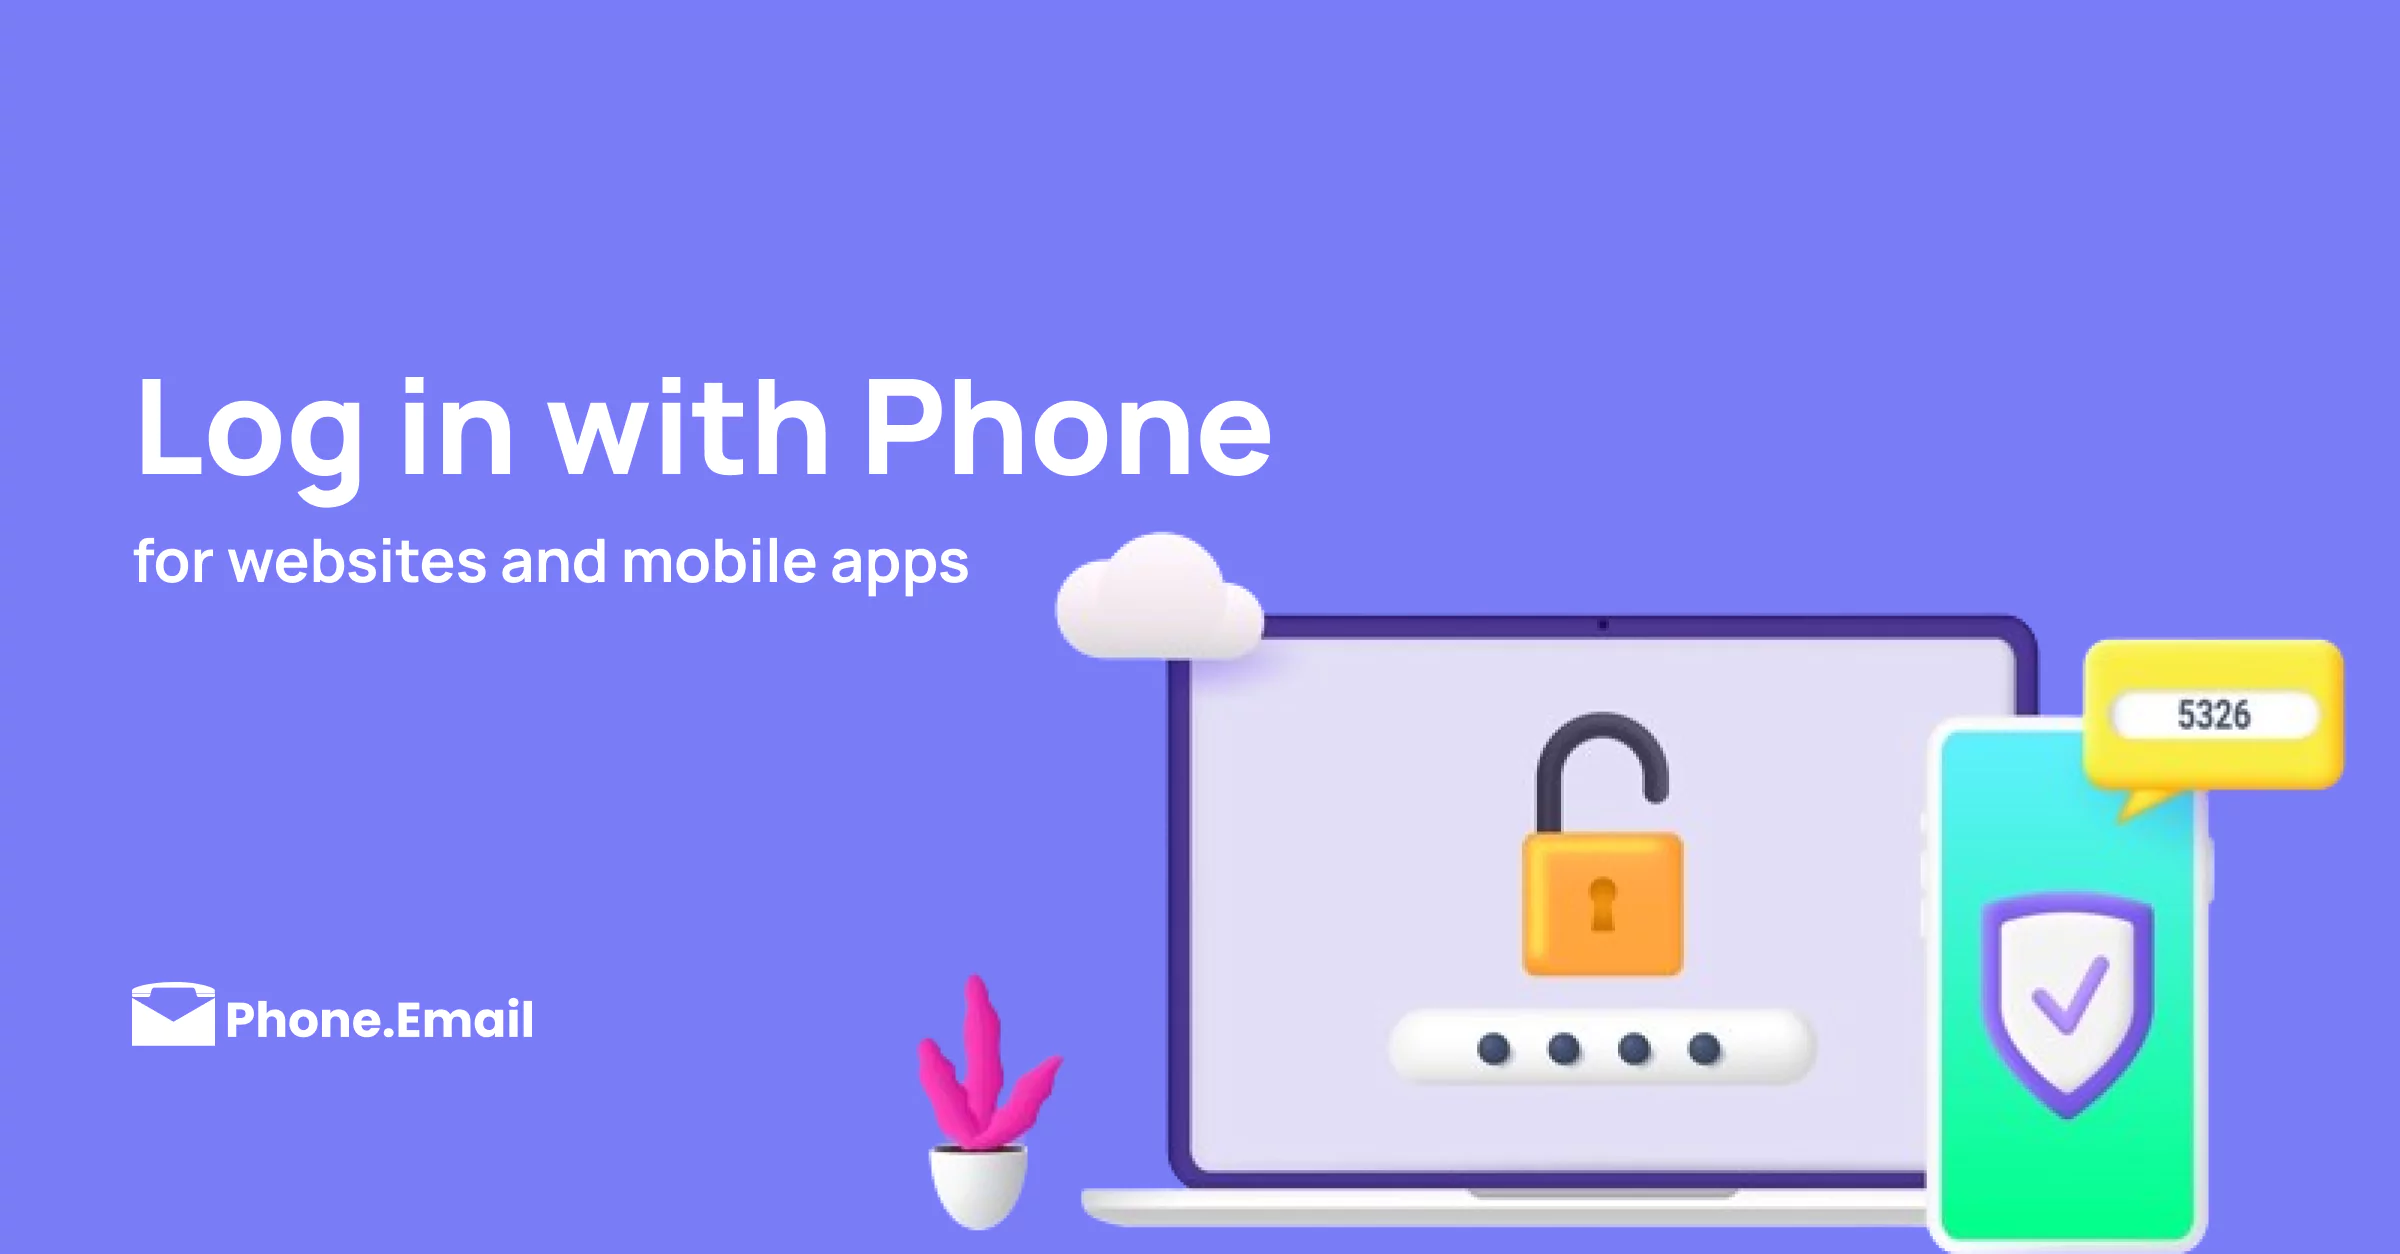 Sign in with phone,sign in with phone number,sign in with phone in php,sign in with phone number in php,secure phone sign in,easy safe login with phone